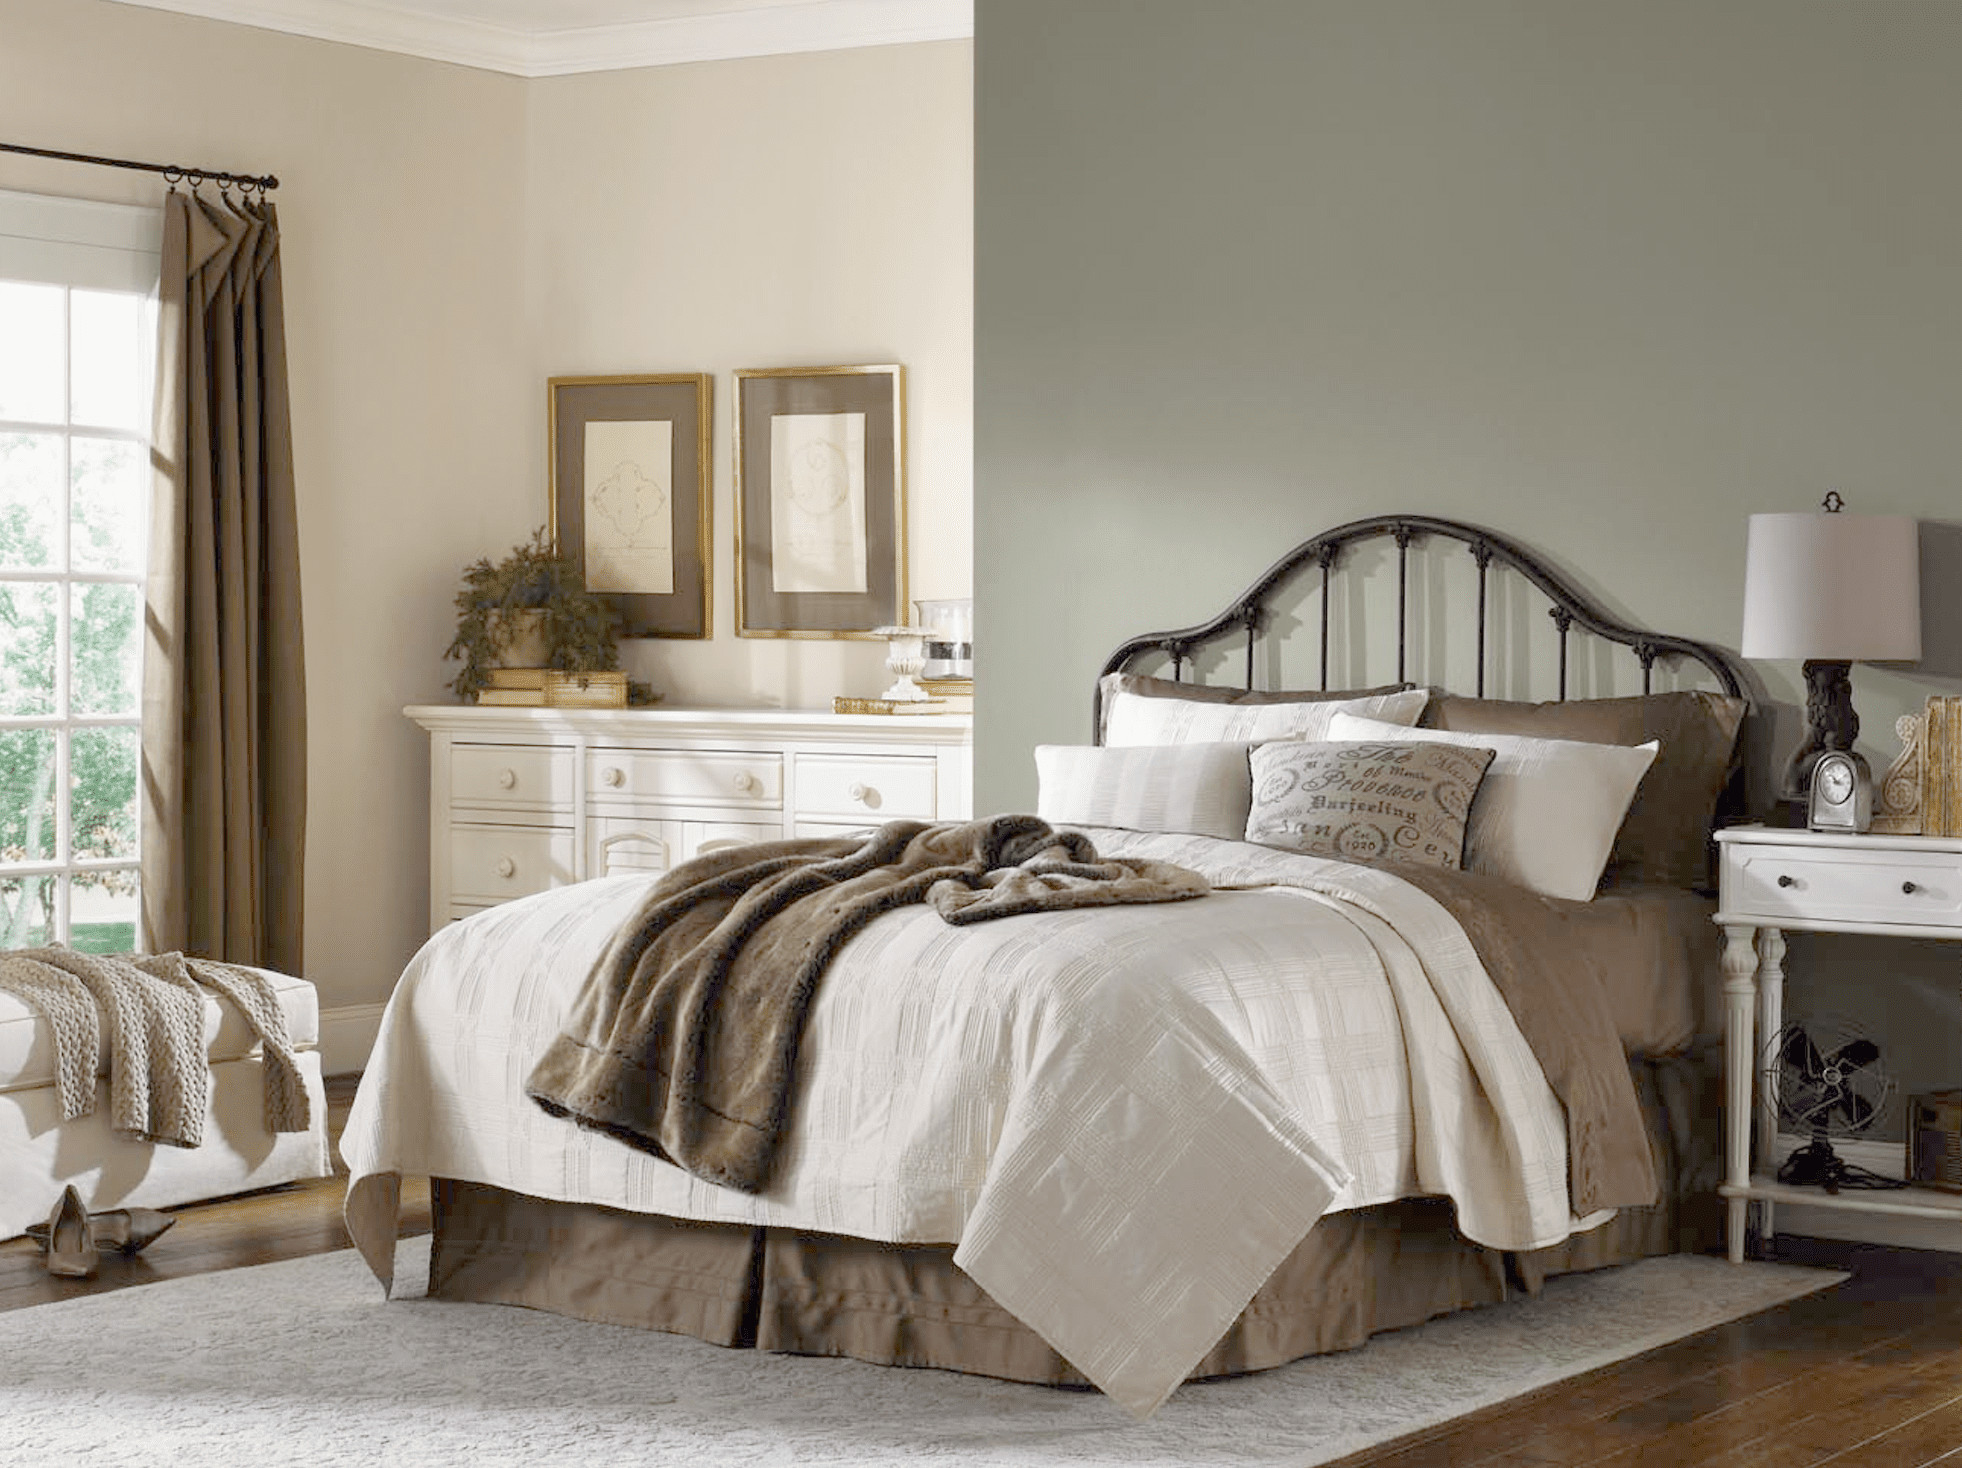 23 Fascinating Sherwin Williams Bedroom Colors - Home, Family, Style